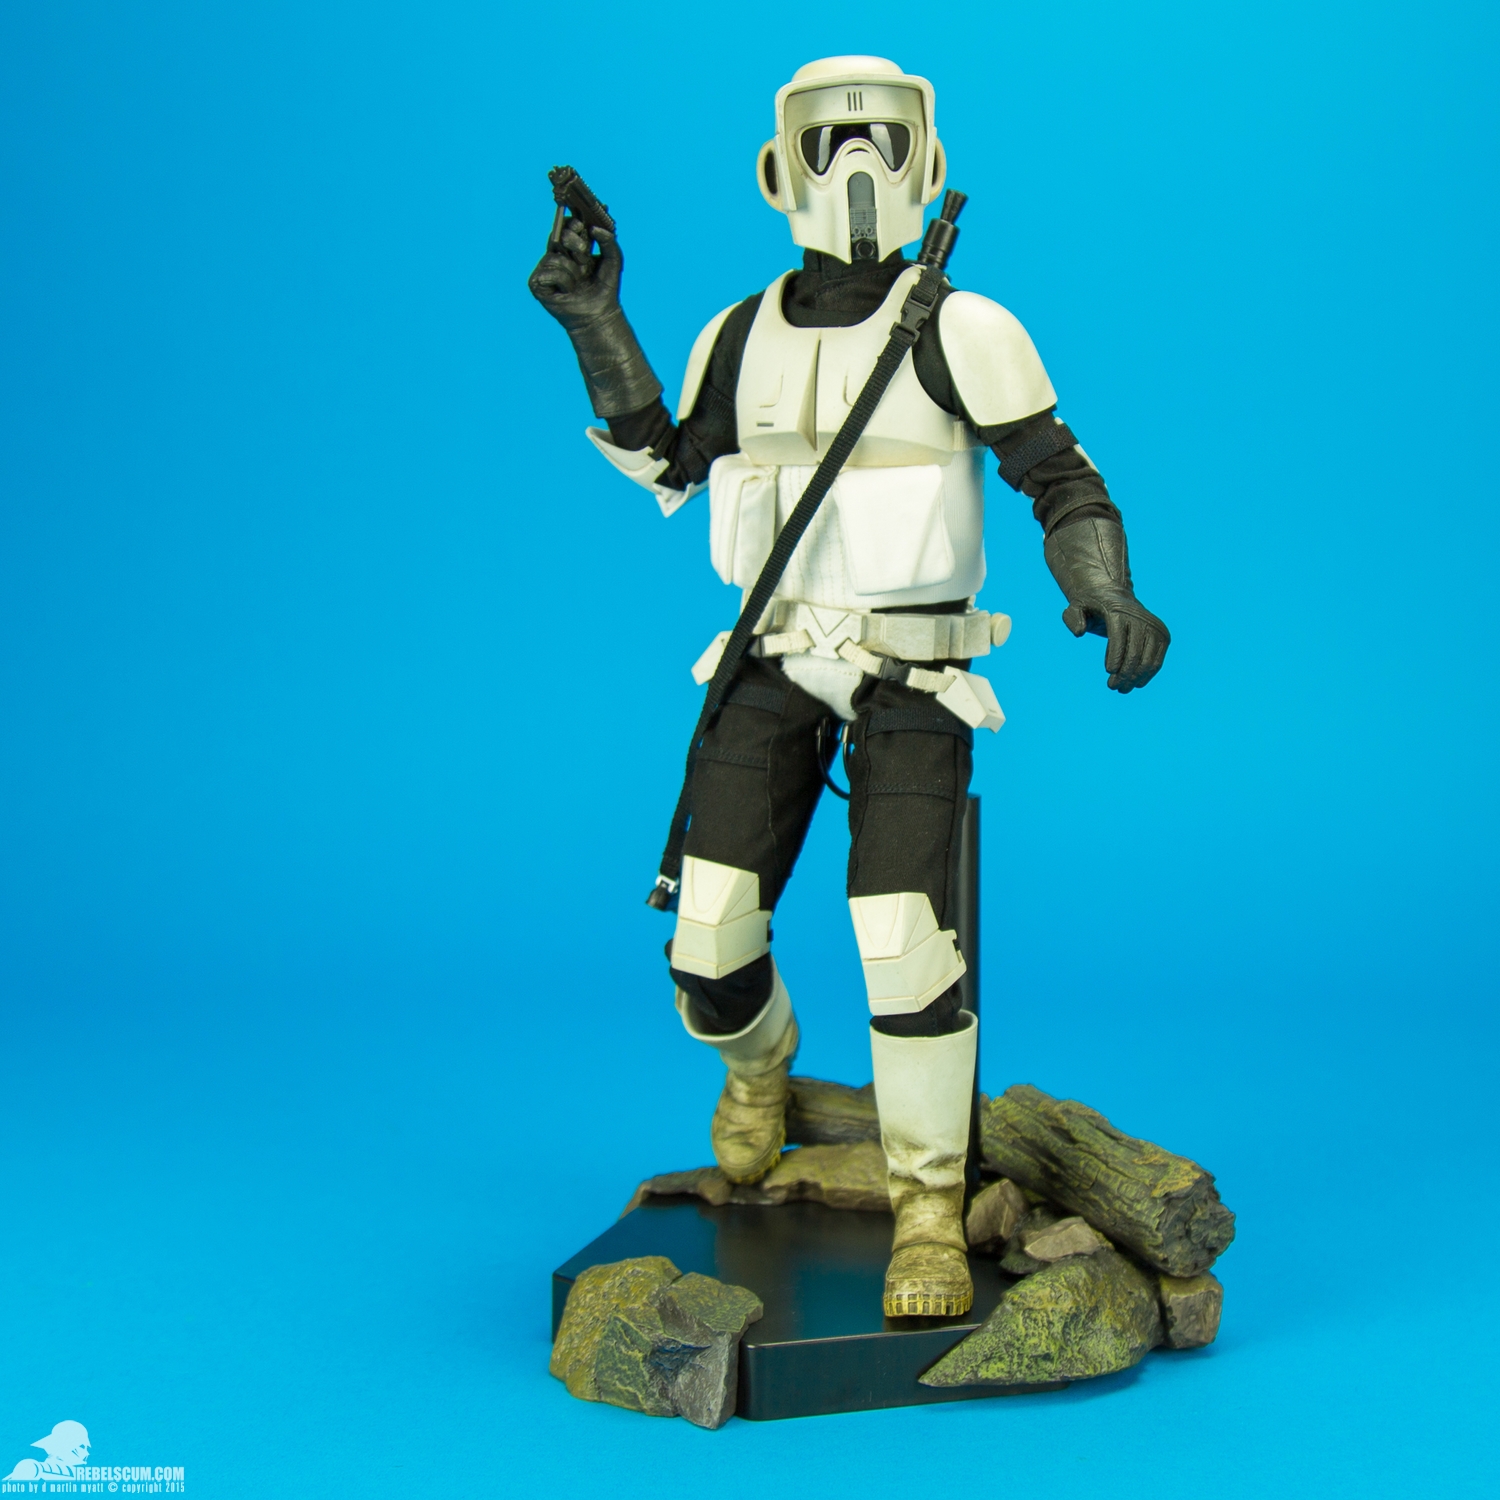 Scout-Trooper-Sixth-Scale-Figure-Sideshow-Collectibles-020.jpg